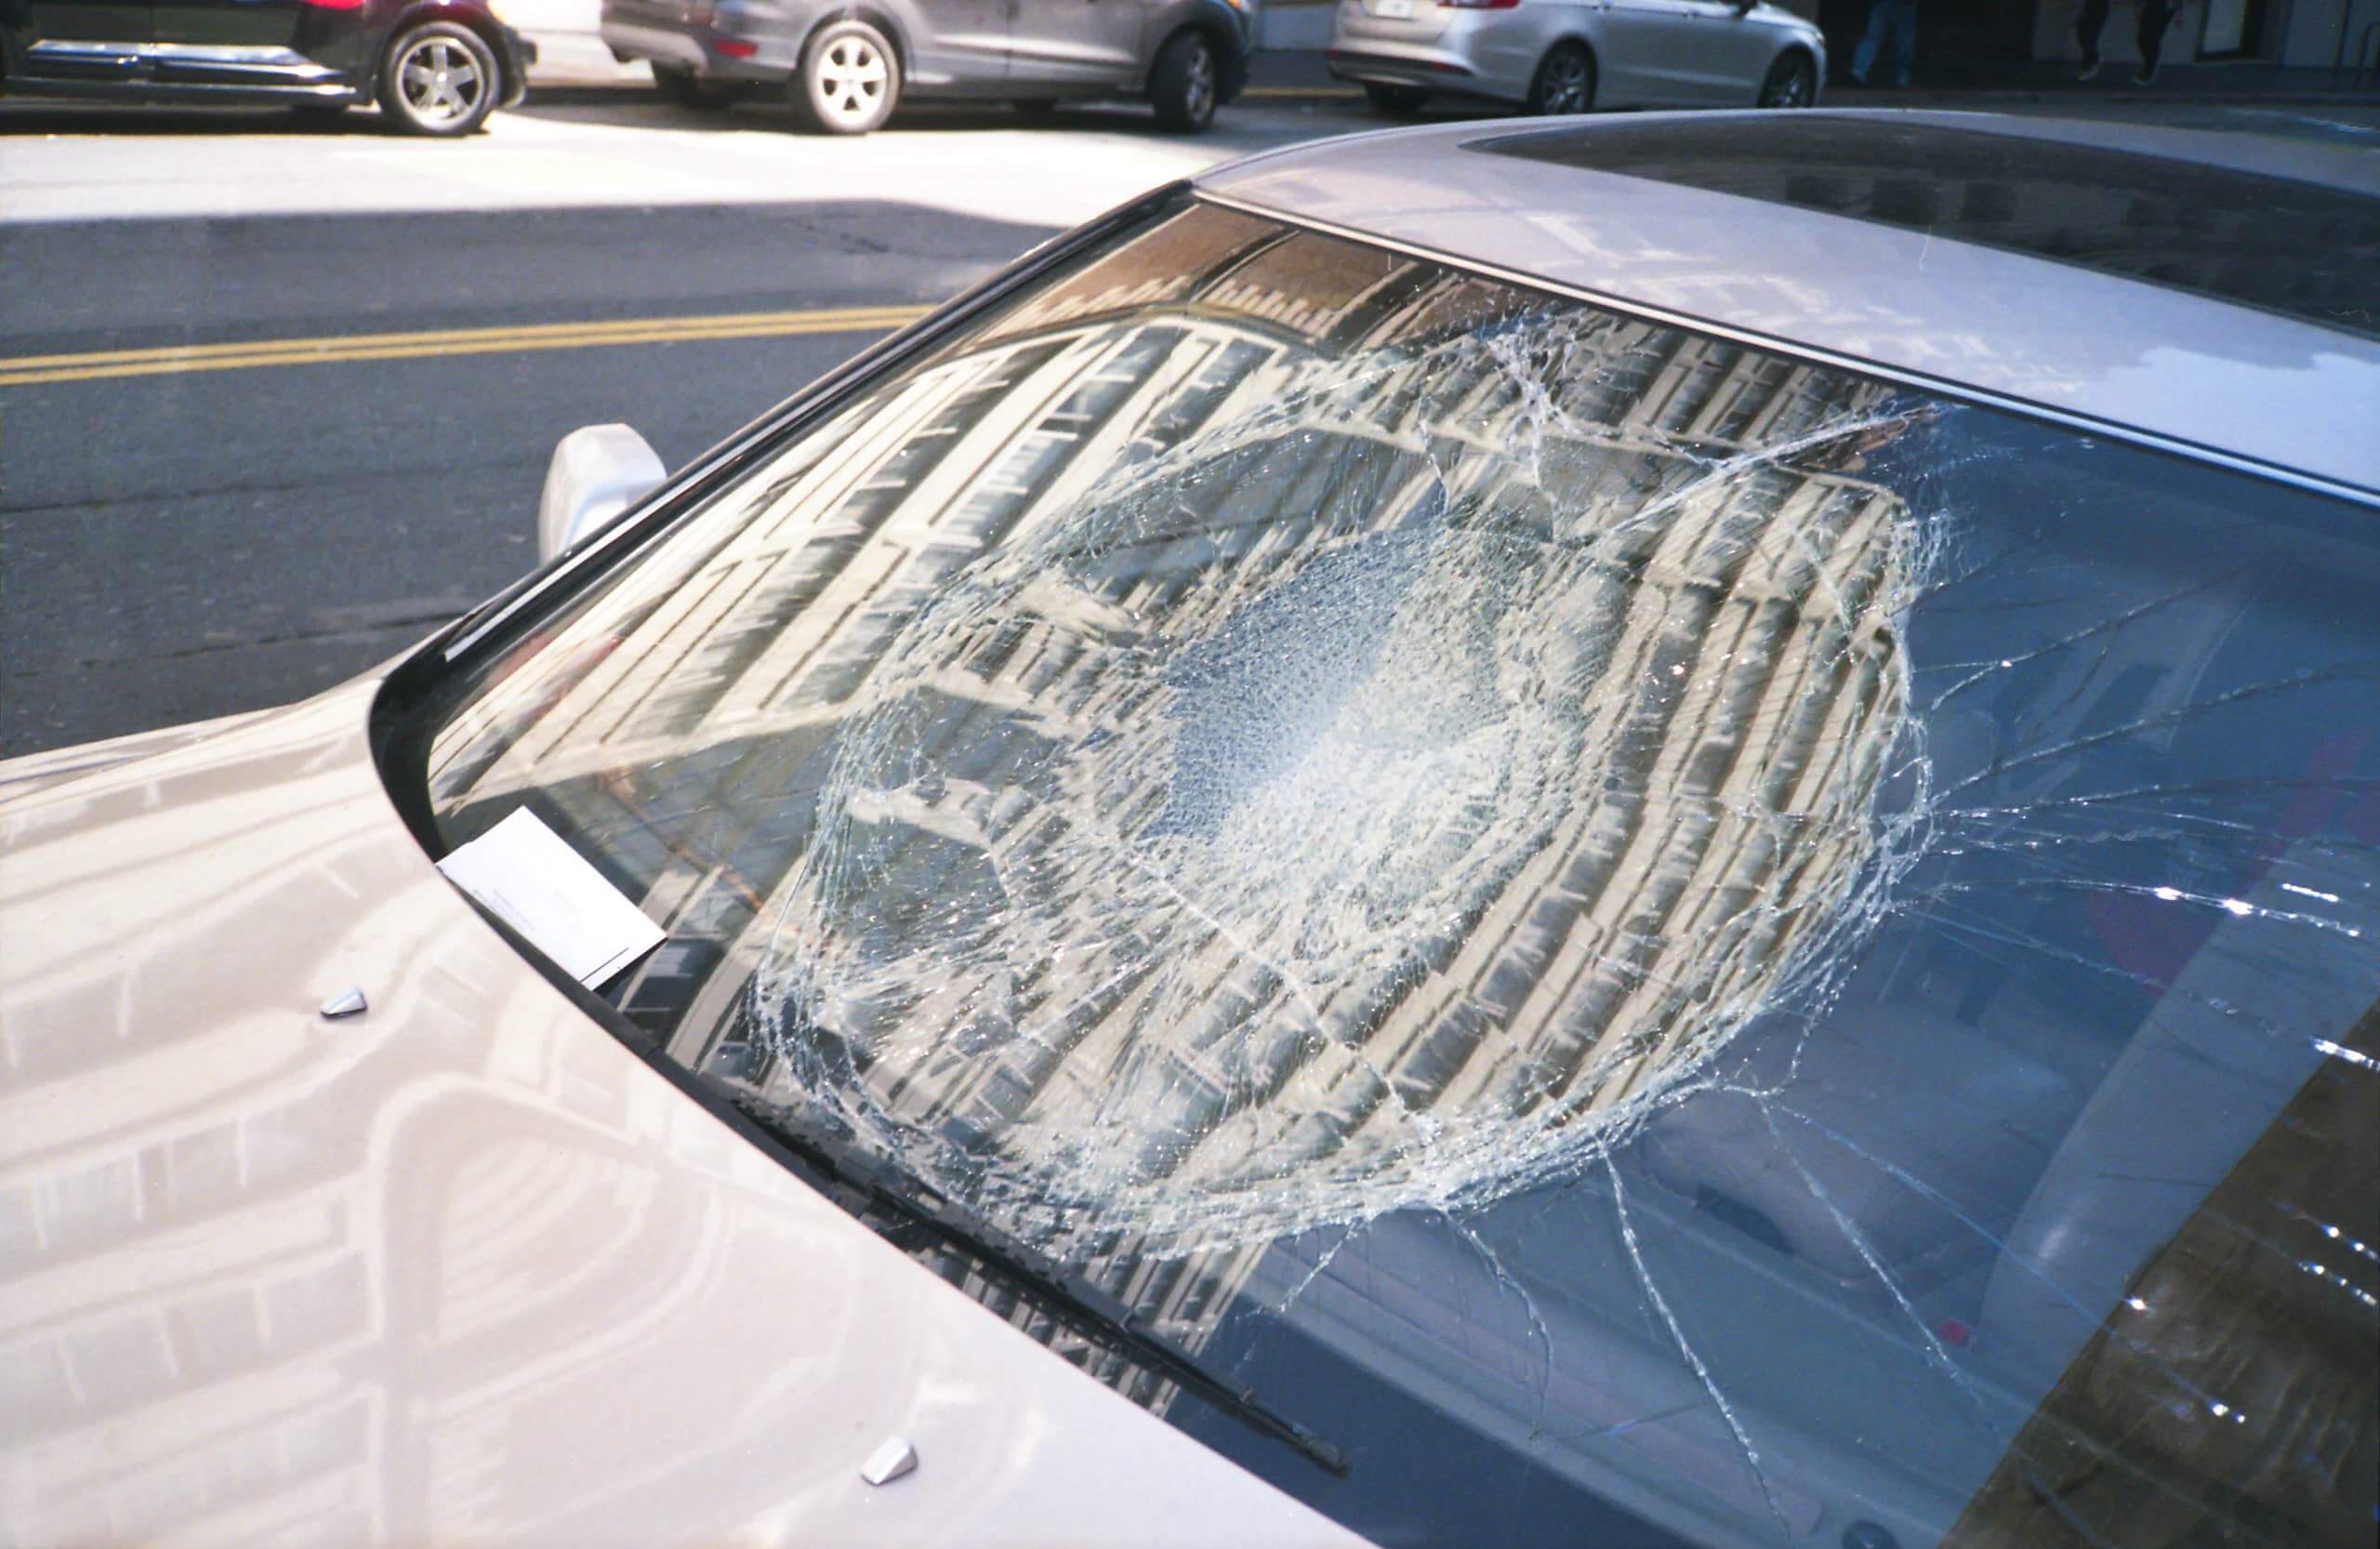 Window Broken and Insurance Coming to Review Insurance Claim